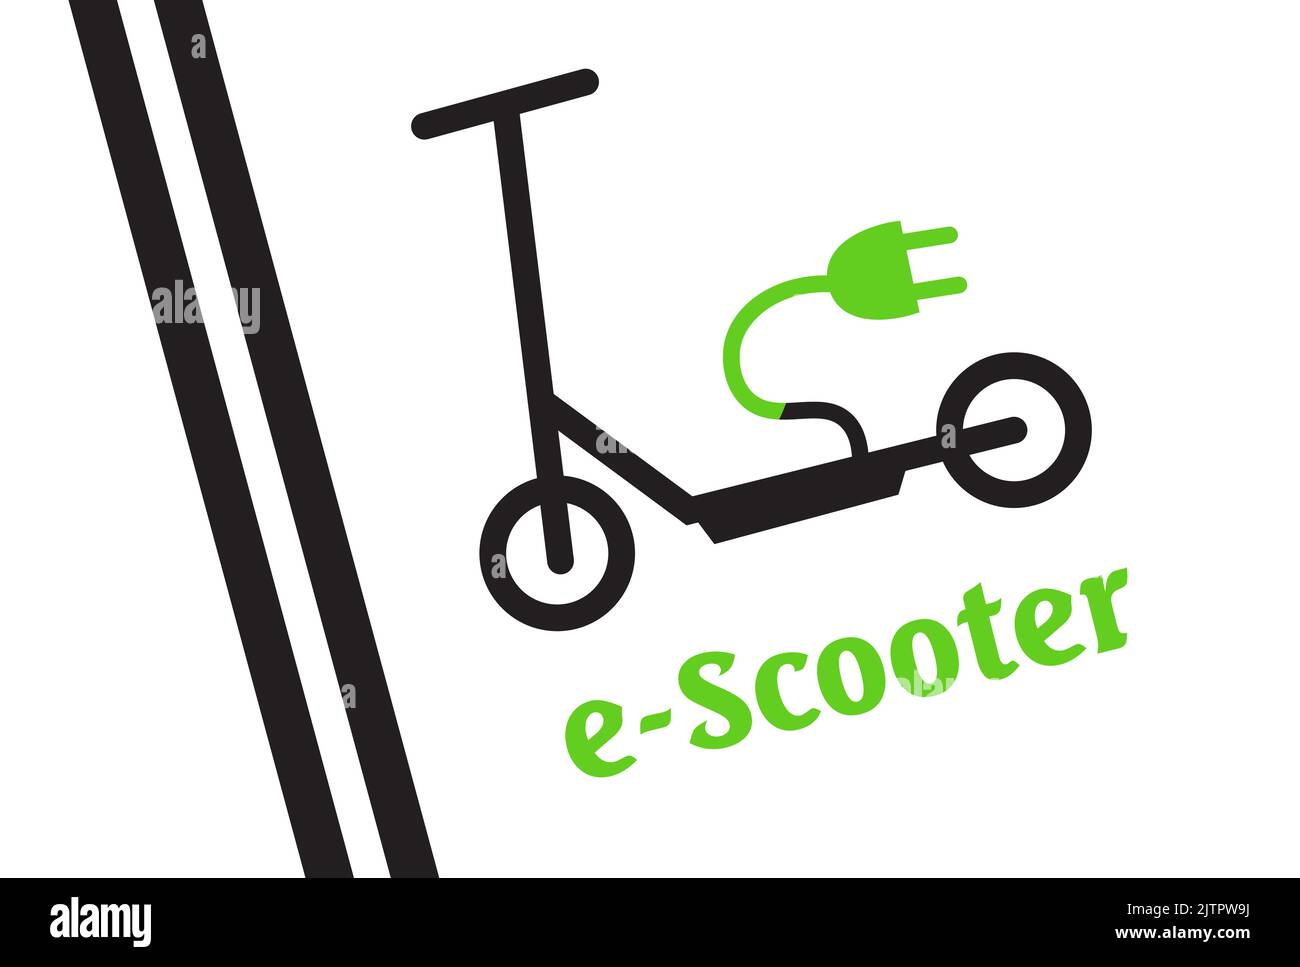 Scooter zone green roadsign for eco friendly green mobility and city transport. Parking lot warning label for scooter. Vector. Stock Vector